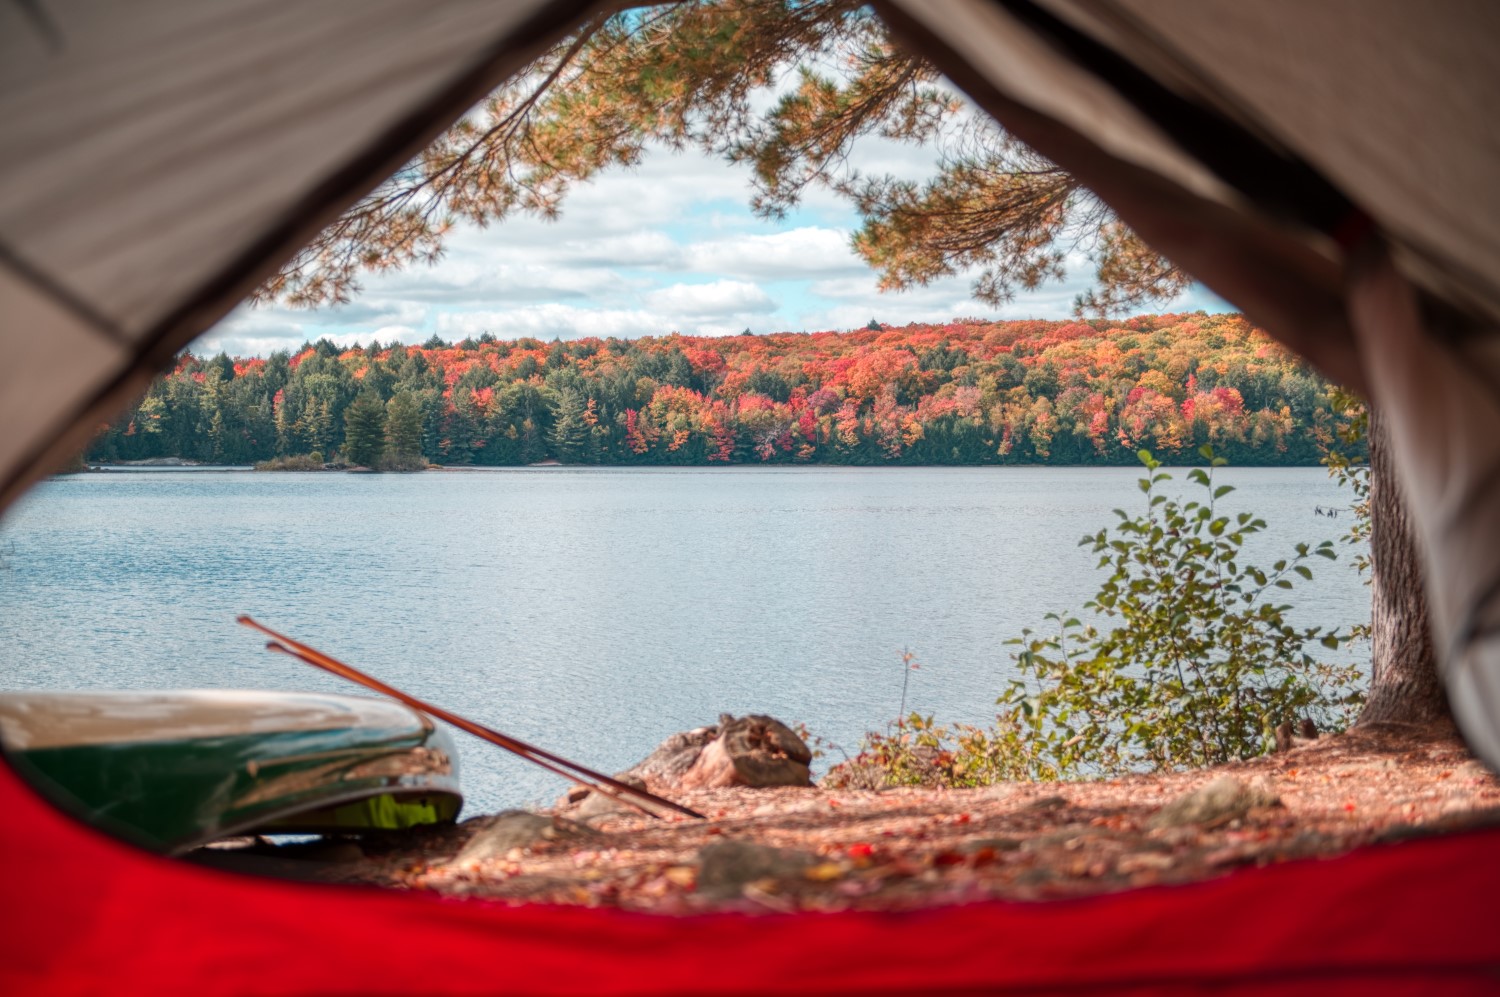 View from an open tent door, looking out at a still lake and the far shore, where trees are changing colours from green to red, yellow and orange.